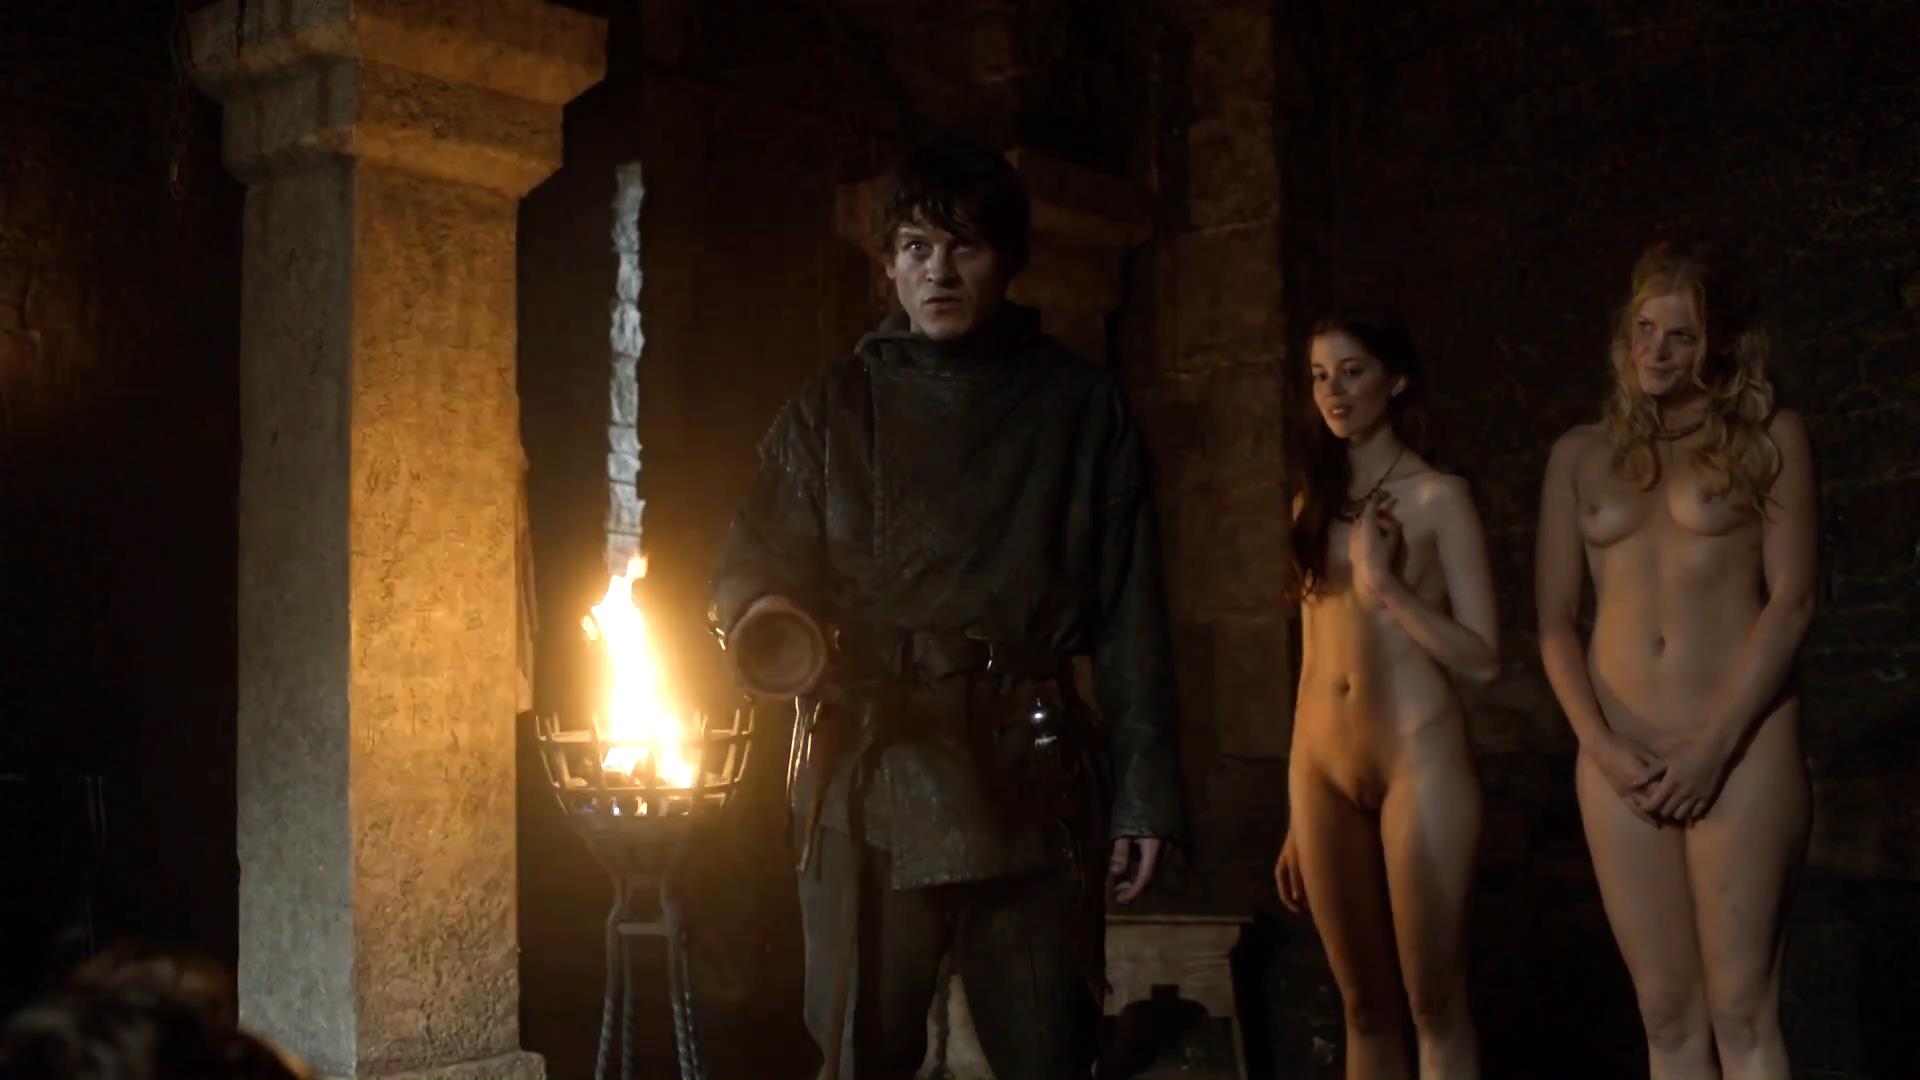 Charlotte Hope tits / boobs exposed in game of thrones - topless celeb part 2